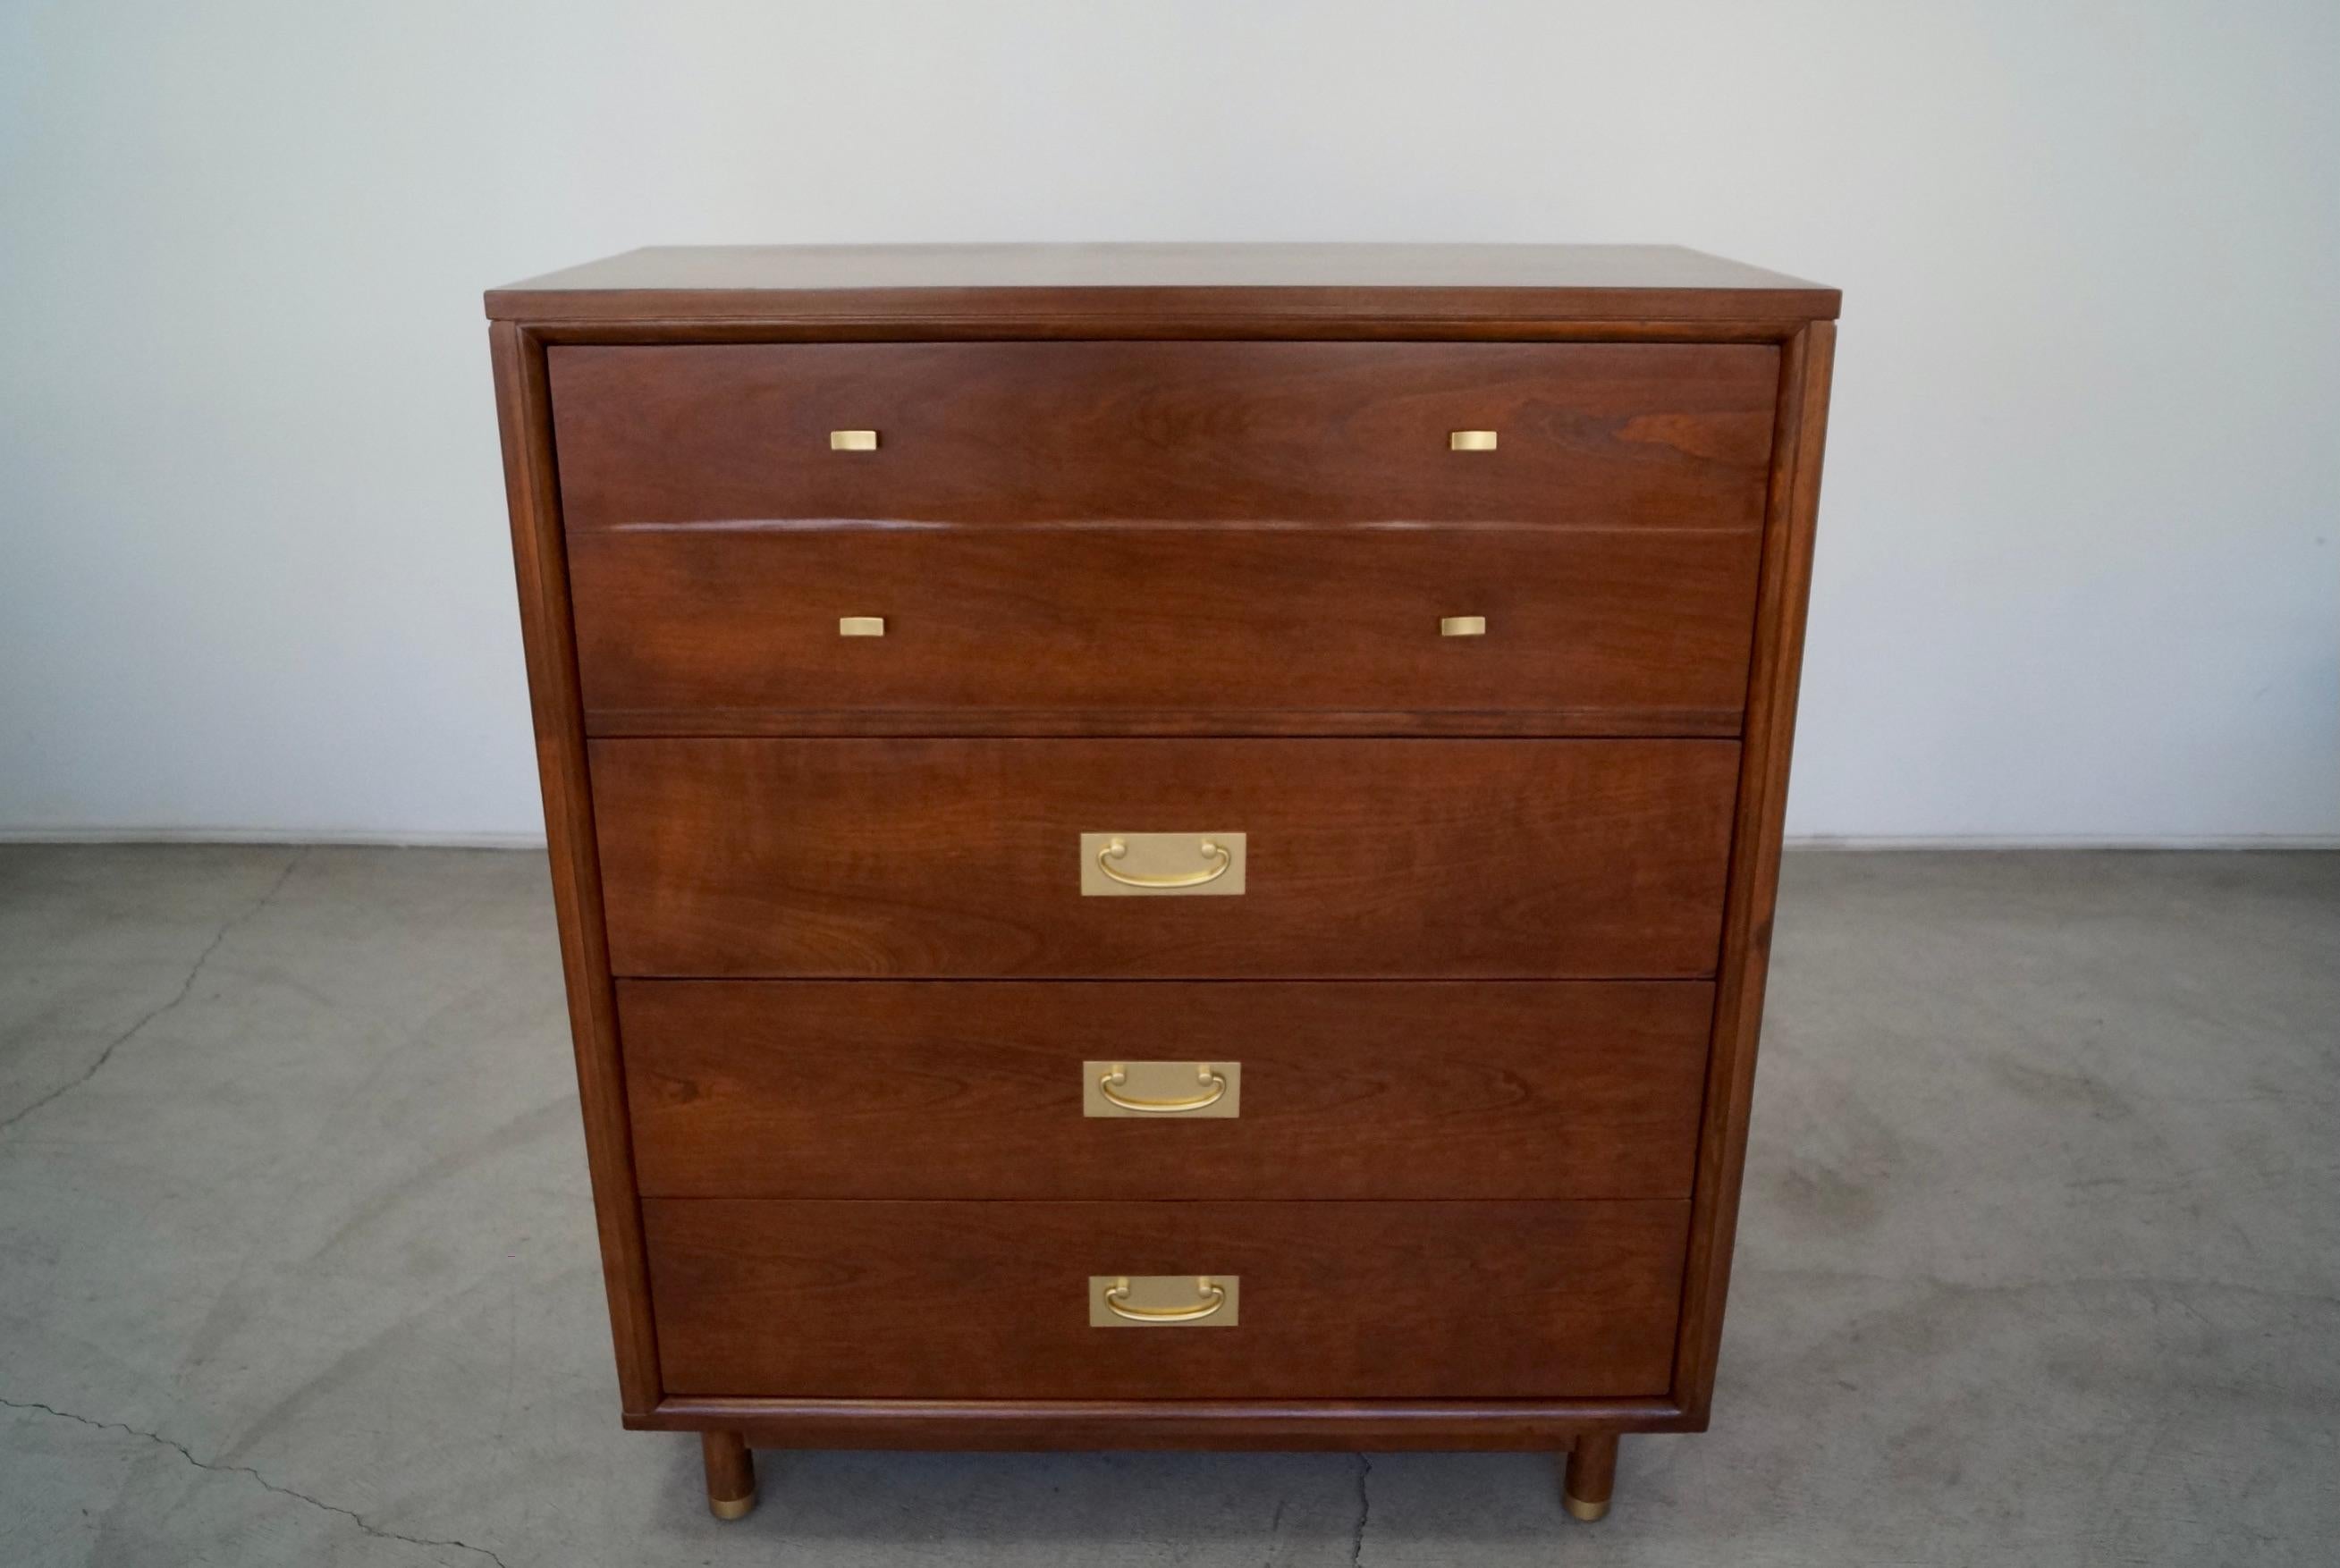 Vintage Mid-Century Modern dresser for sale. Manufactured in the 1950's, and has been professionally refinished in walnut. It's made of cherry, and has the original solid brass pull handles. It has cylinder legs capped in solid brass. This dresser